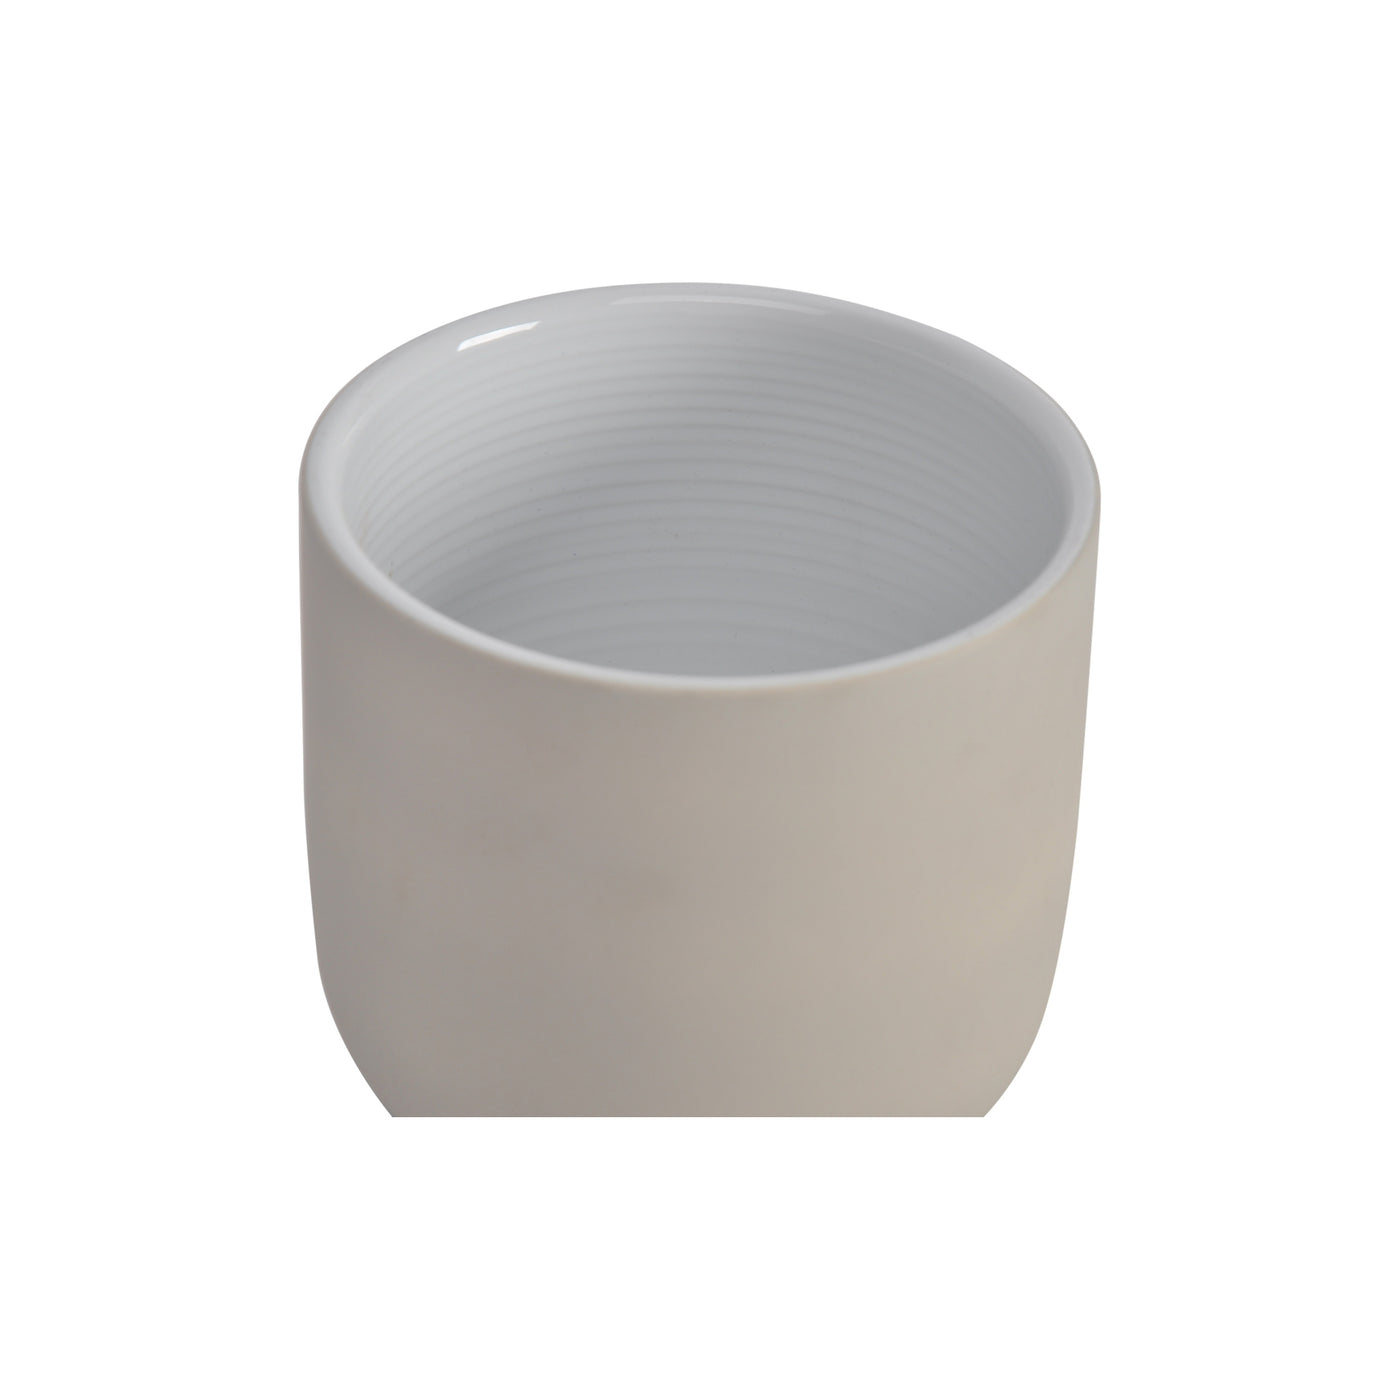 A contemporary keepsie. Small but stately and pretty with a purpose, the handmade ceramic Spice planter will help you crea...